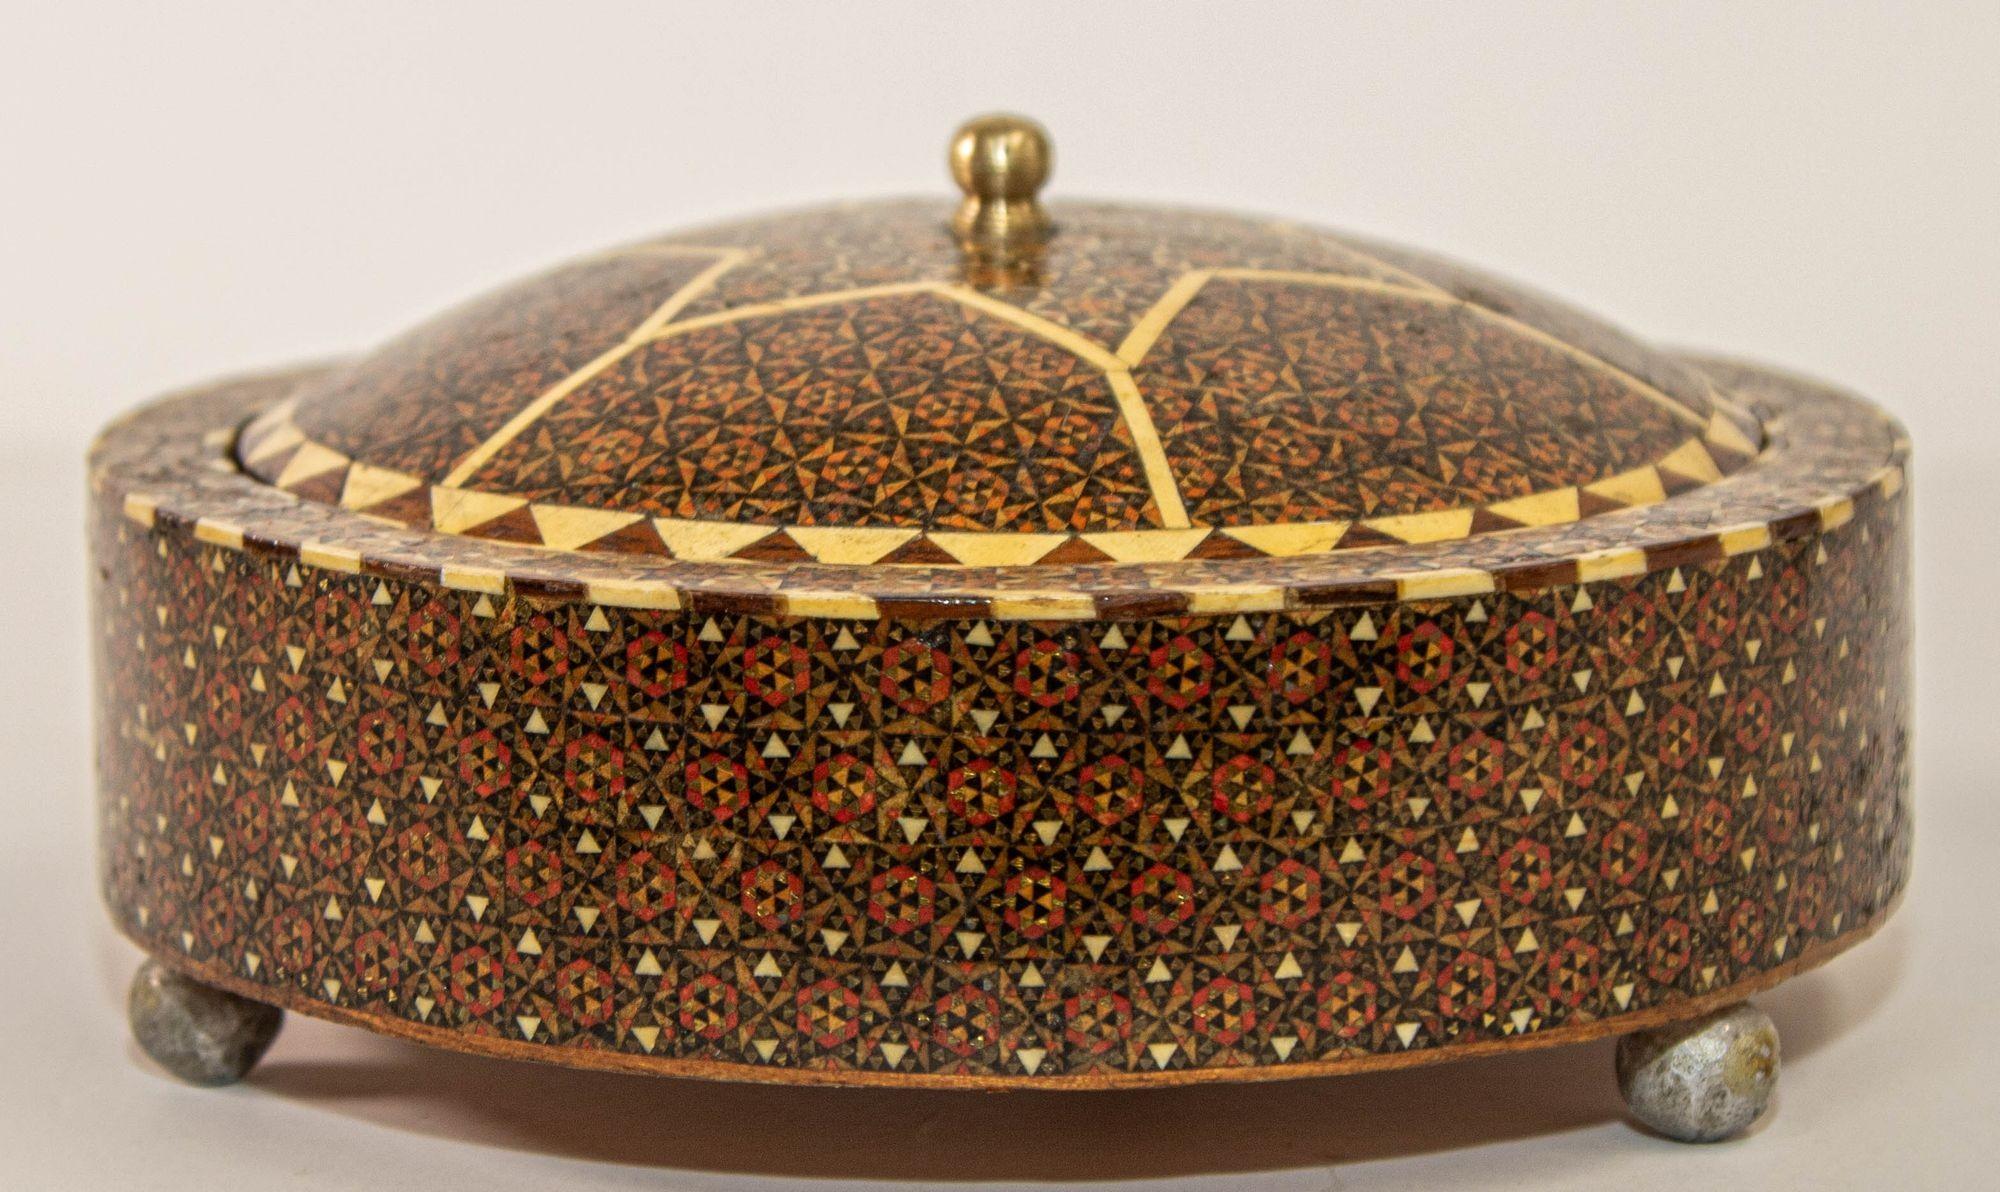 Late 19th c. early 20th c. Persian Footed Wooden Round Jewelry Box.
Antique rare in round shape large Persian wooden box with marquetry called 